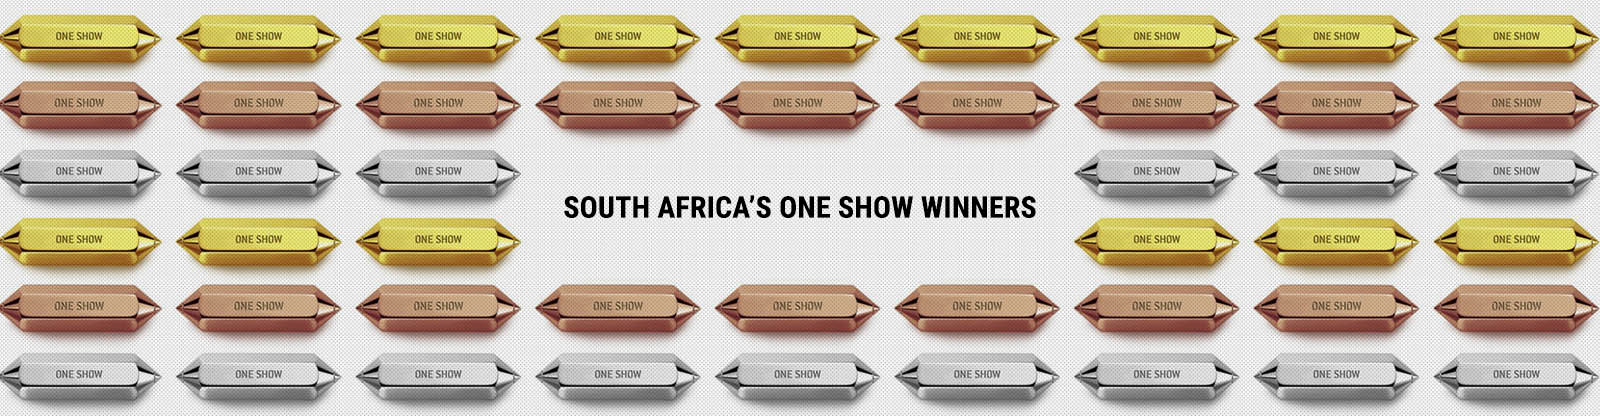 South African One Show Finalists 2019